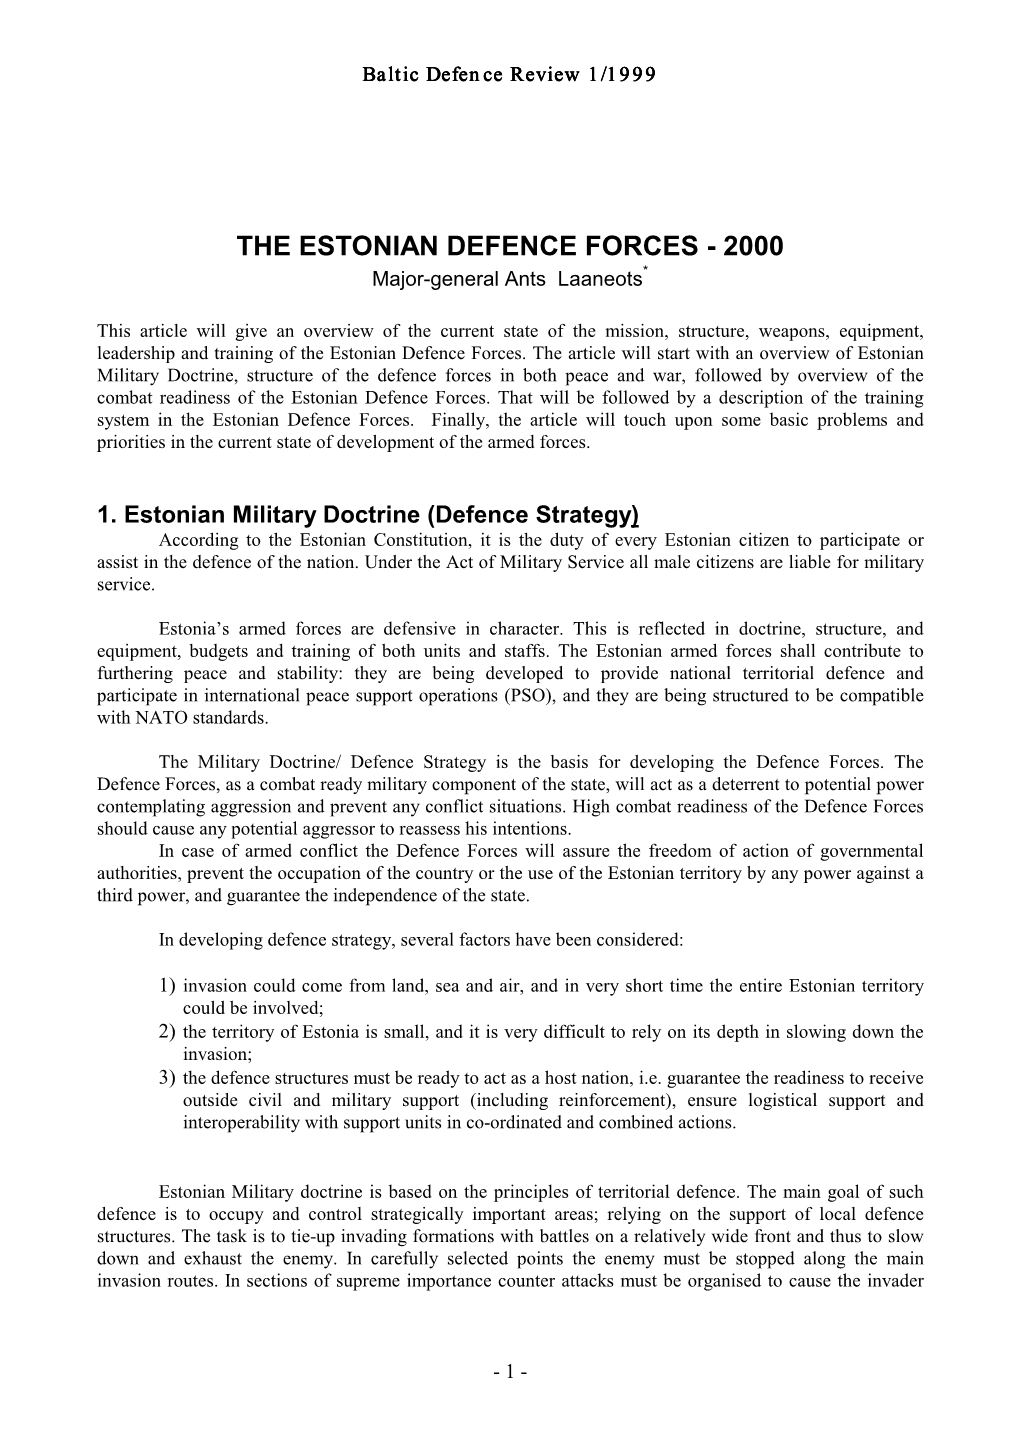 THE ESTONIAN DEFENCE FORCES - 2000 Major-General Ants Laaneots*